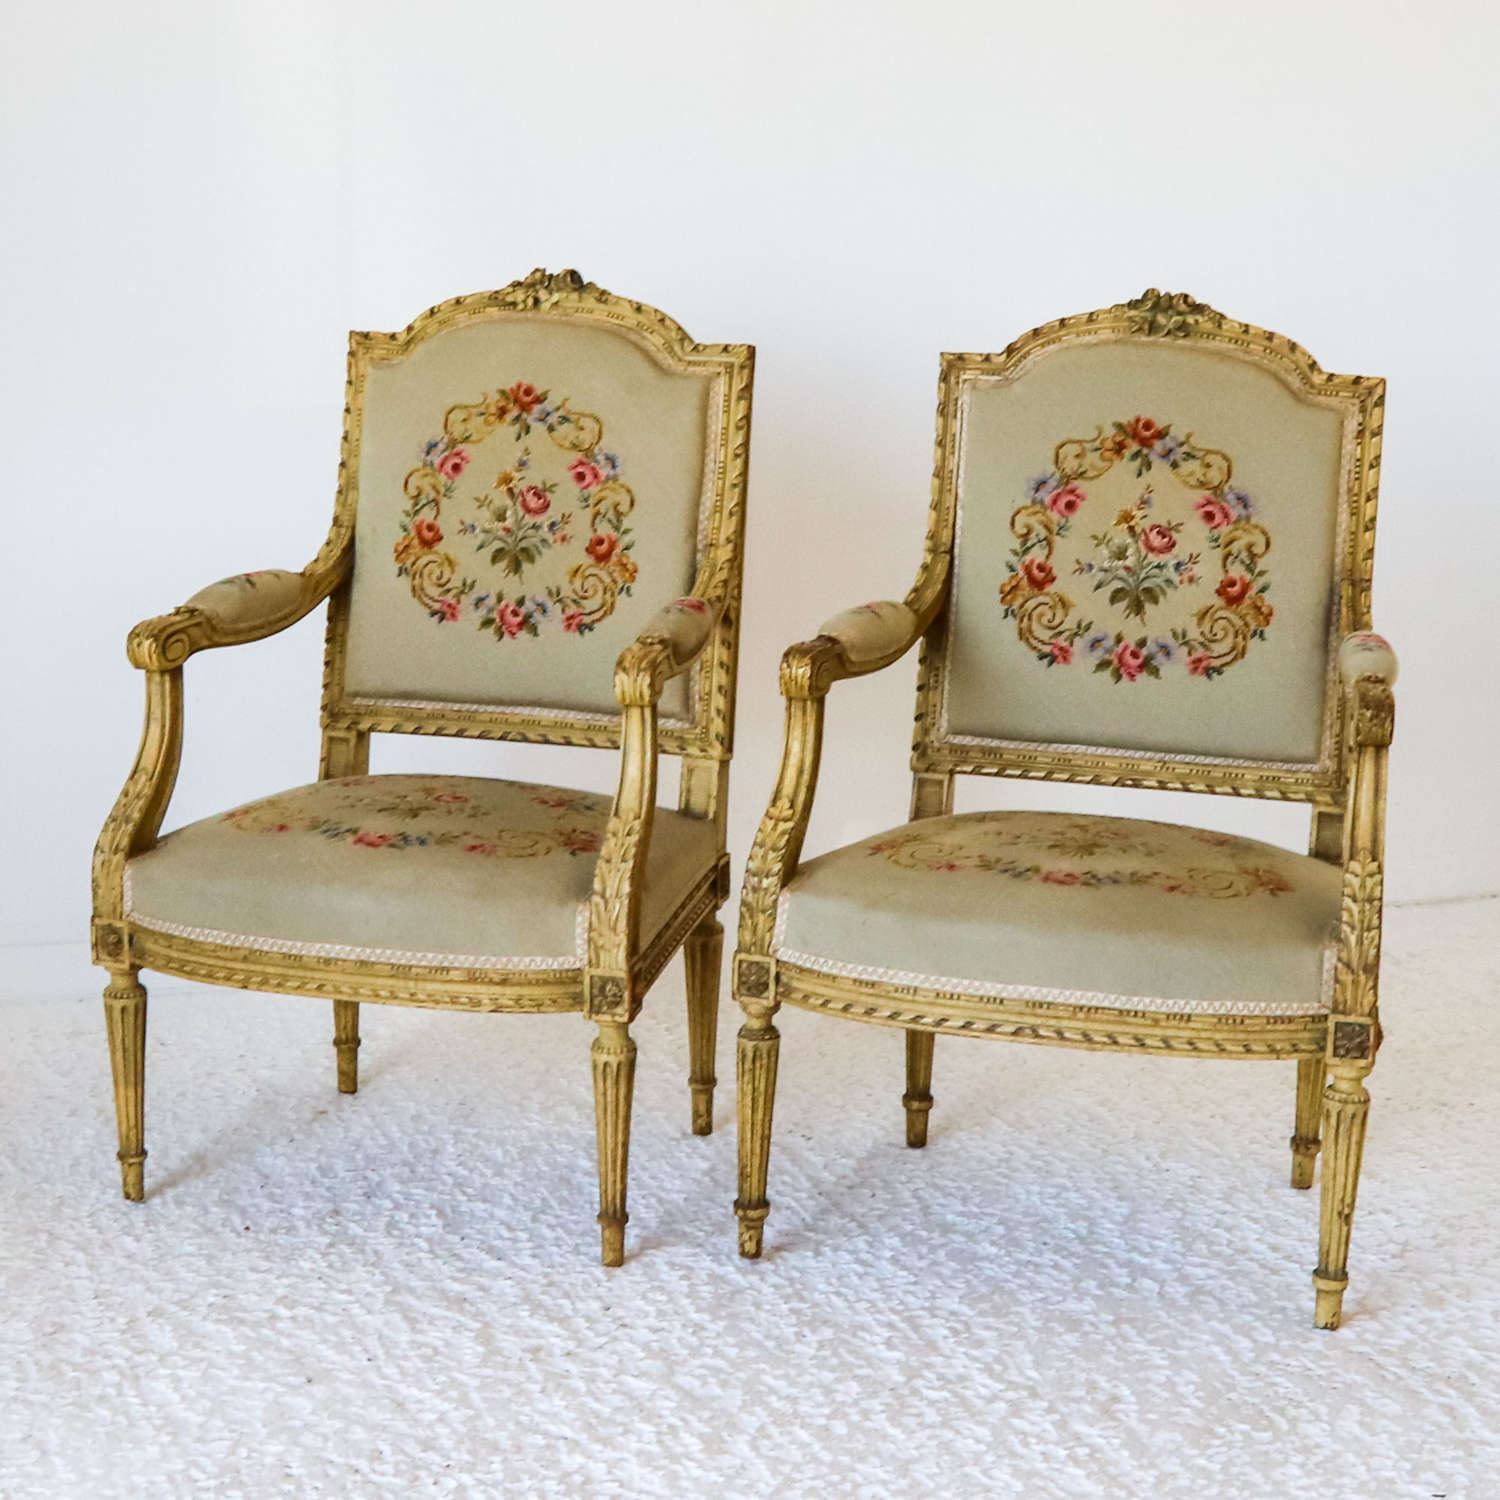 1900 French Louis XVI Style Painted Chairs Petite Point upholstery